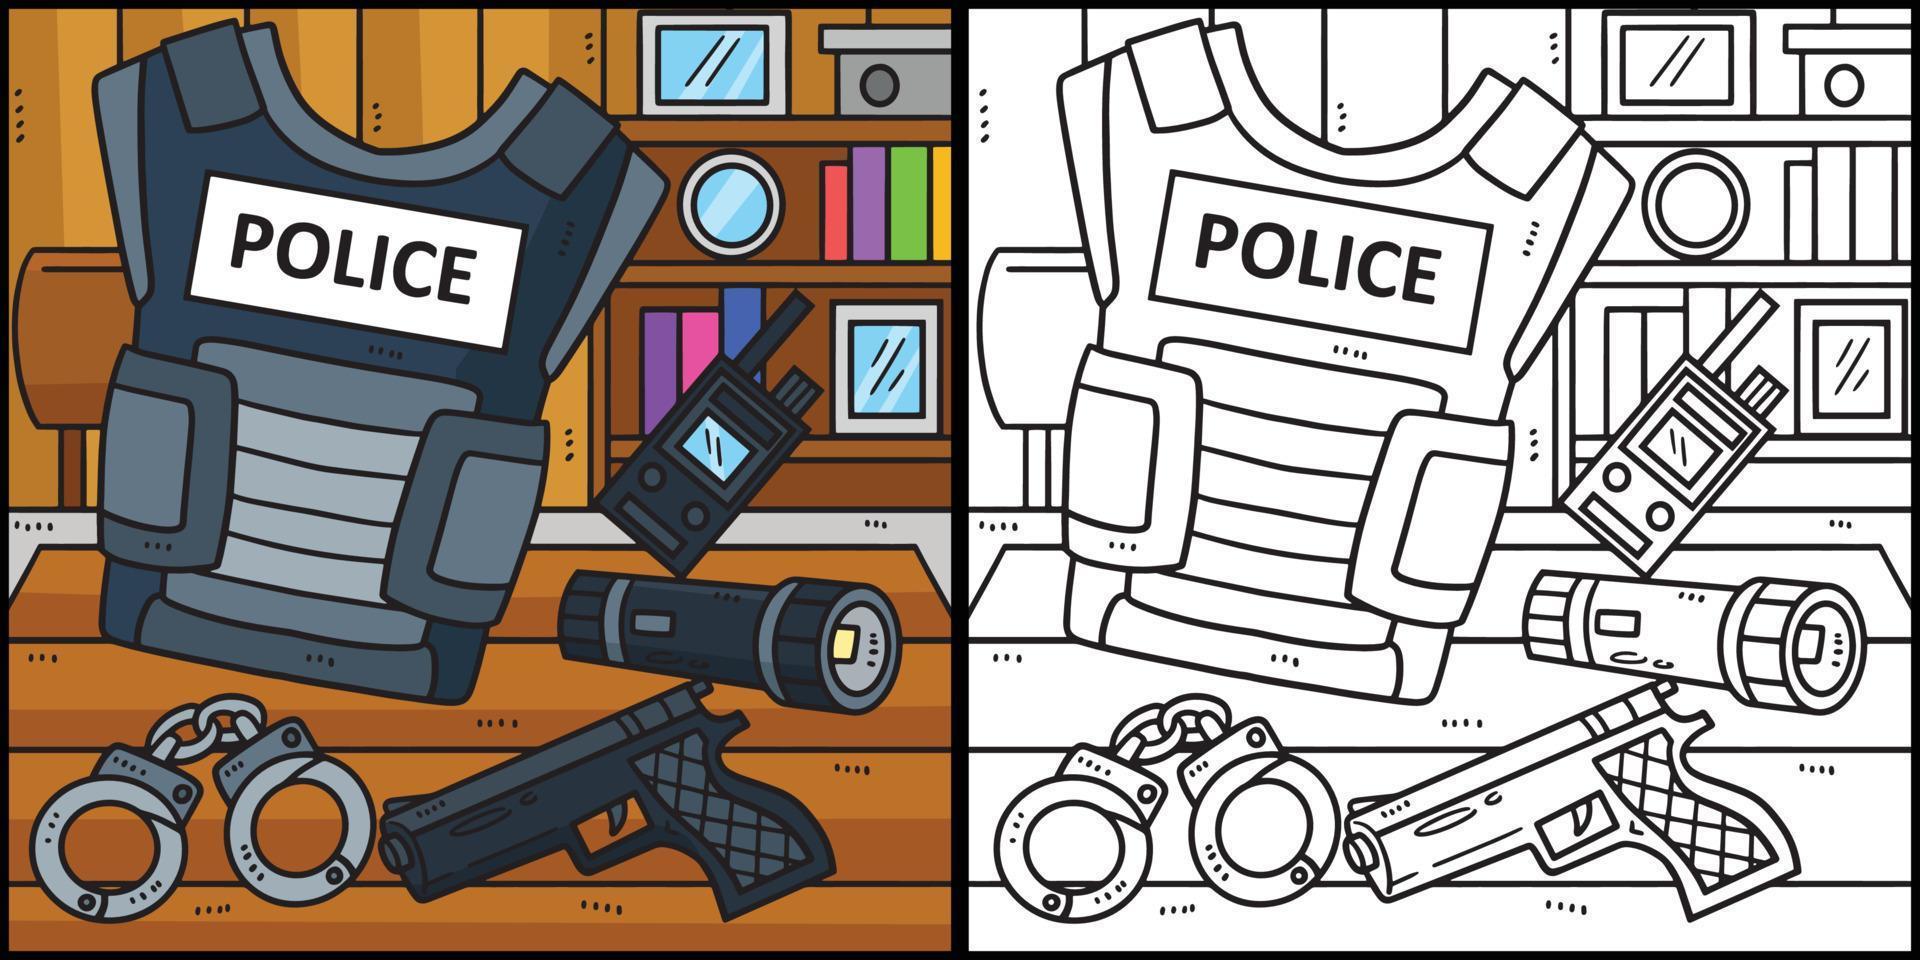 Police Officer Equipment Coloring Illustration vector